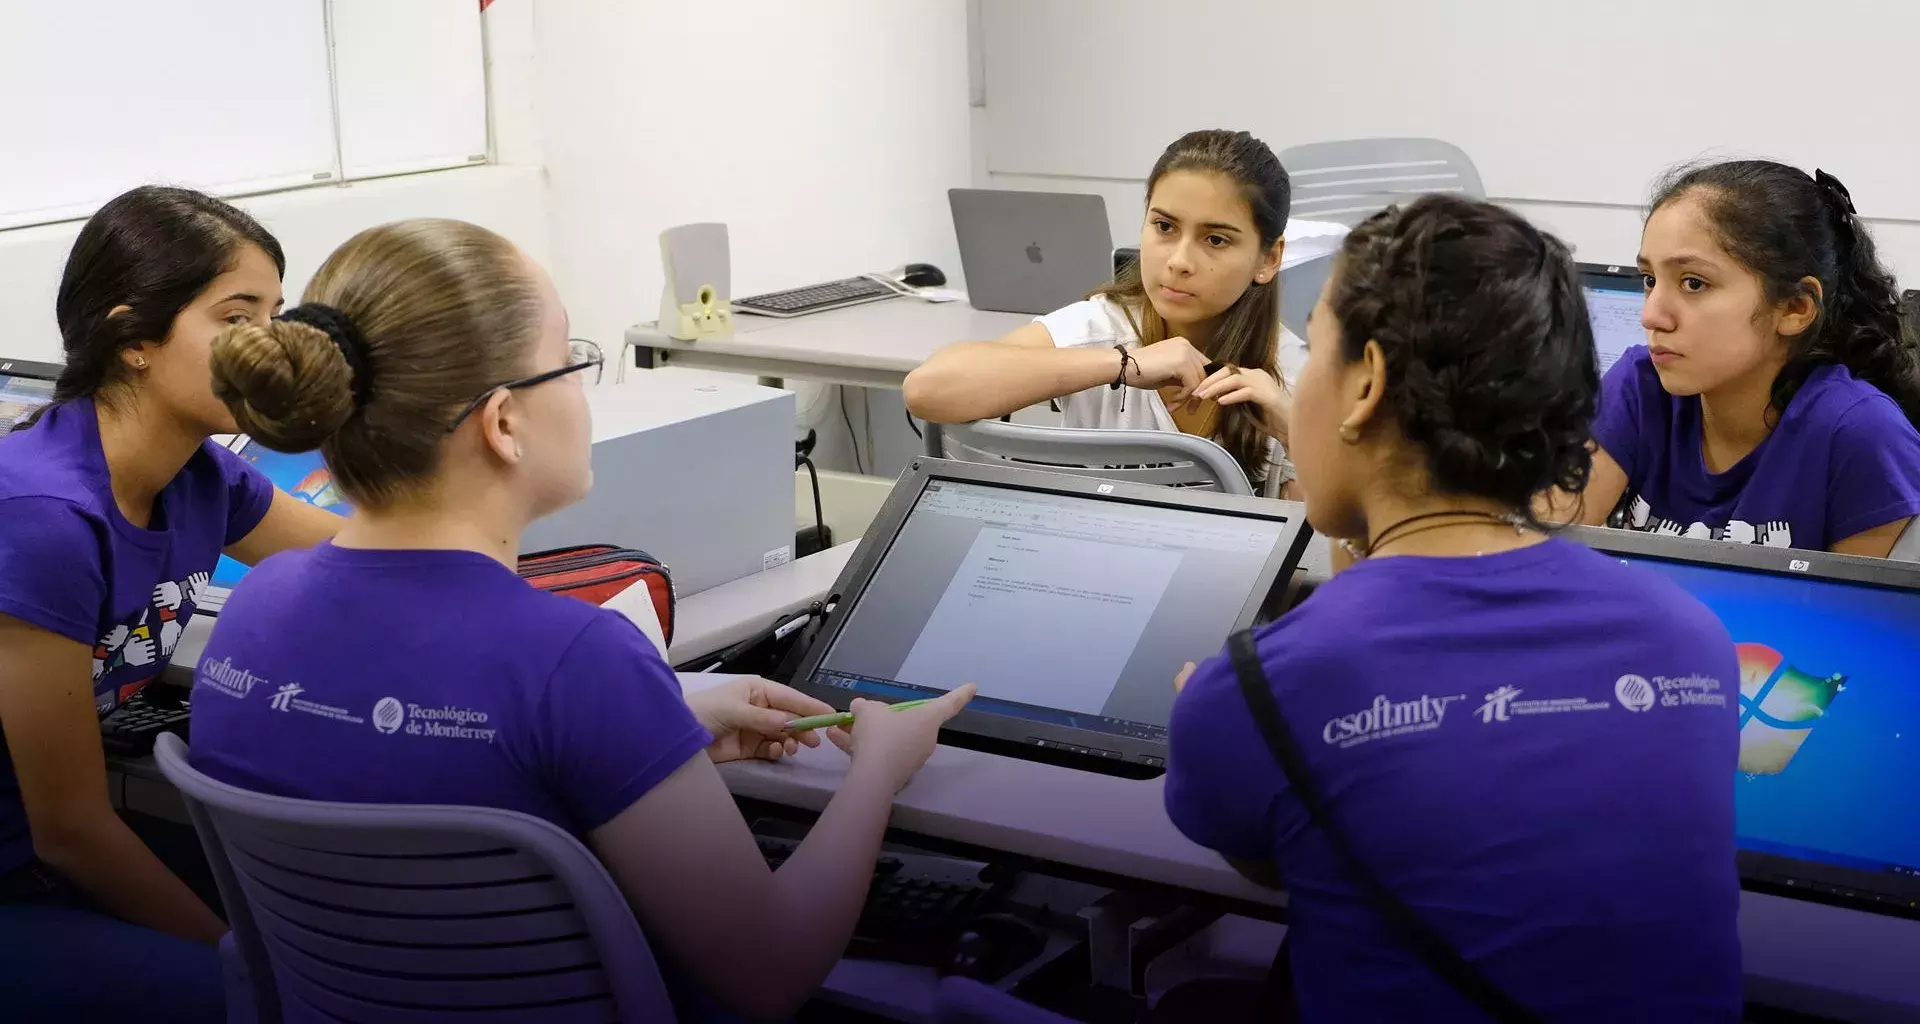 Tec and MIT strive to bring more girls into the world of engineering